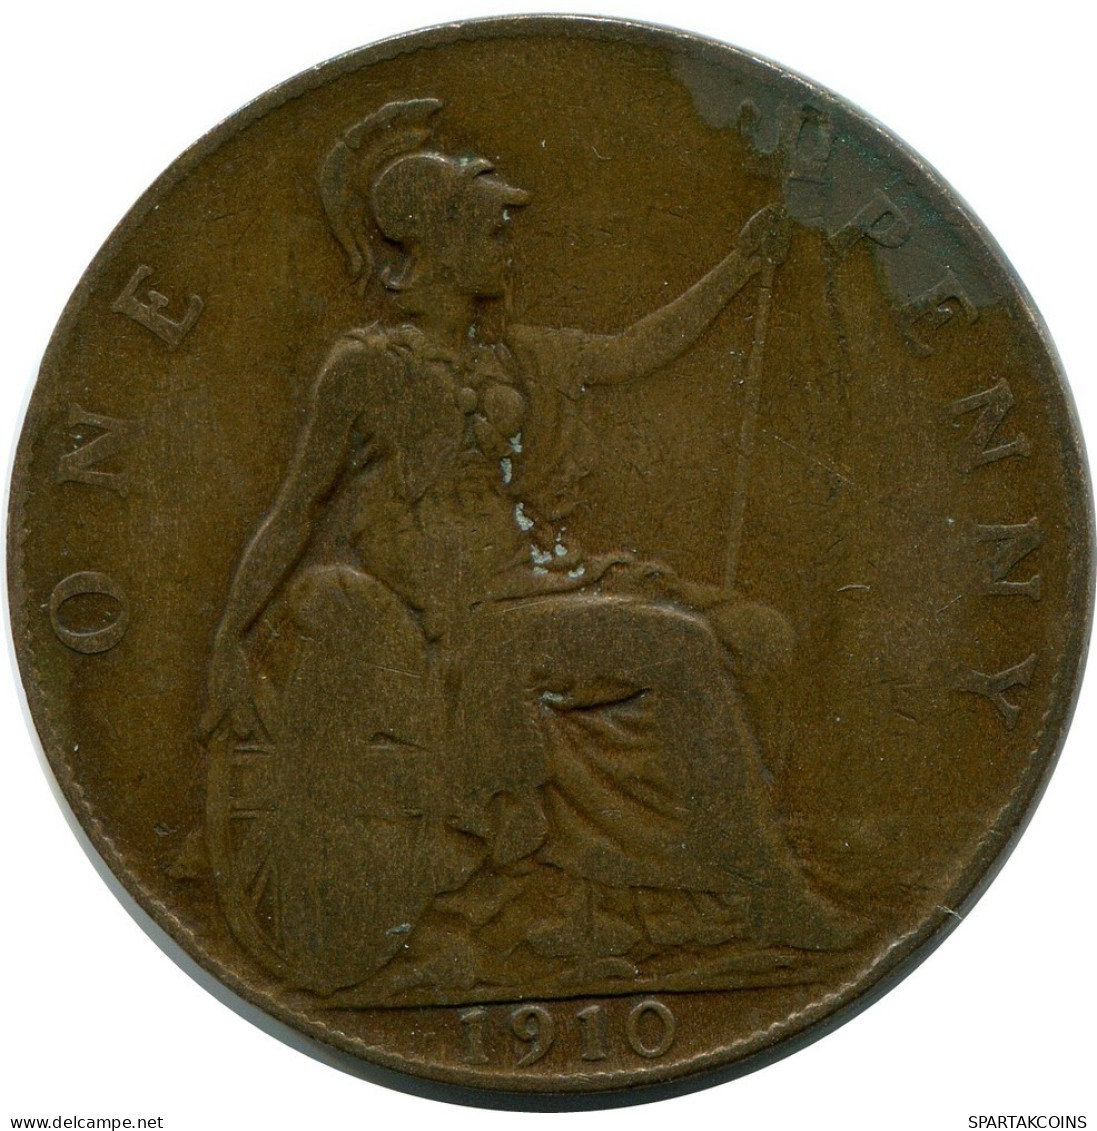 PENNY 1910 UK GREAT BRITAIN Coin #BB005.U.A - D. 1 Penny